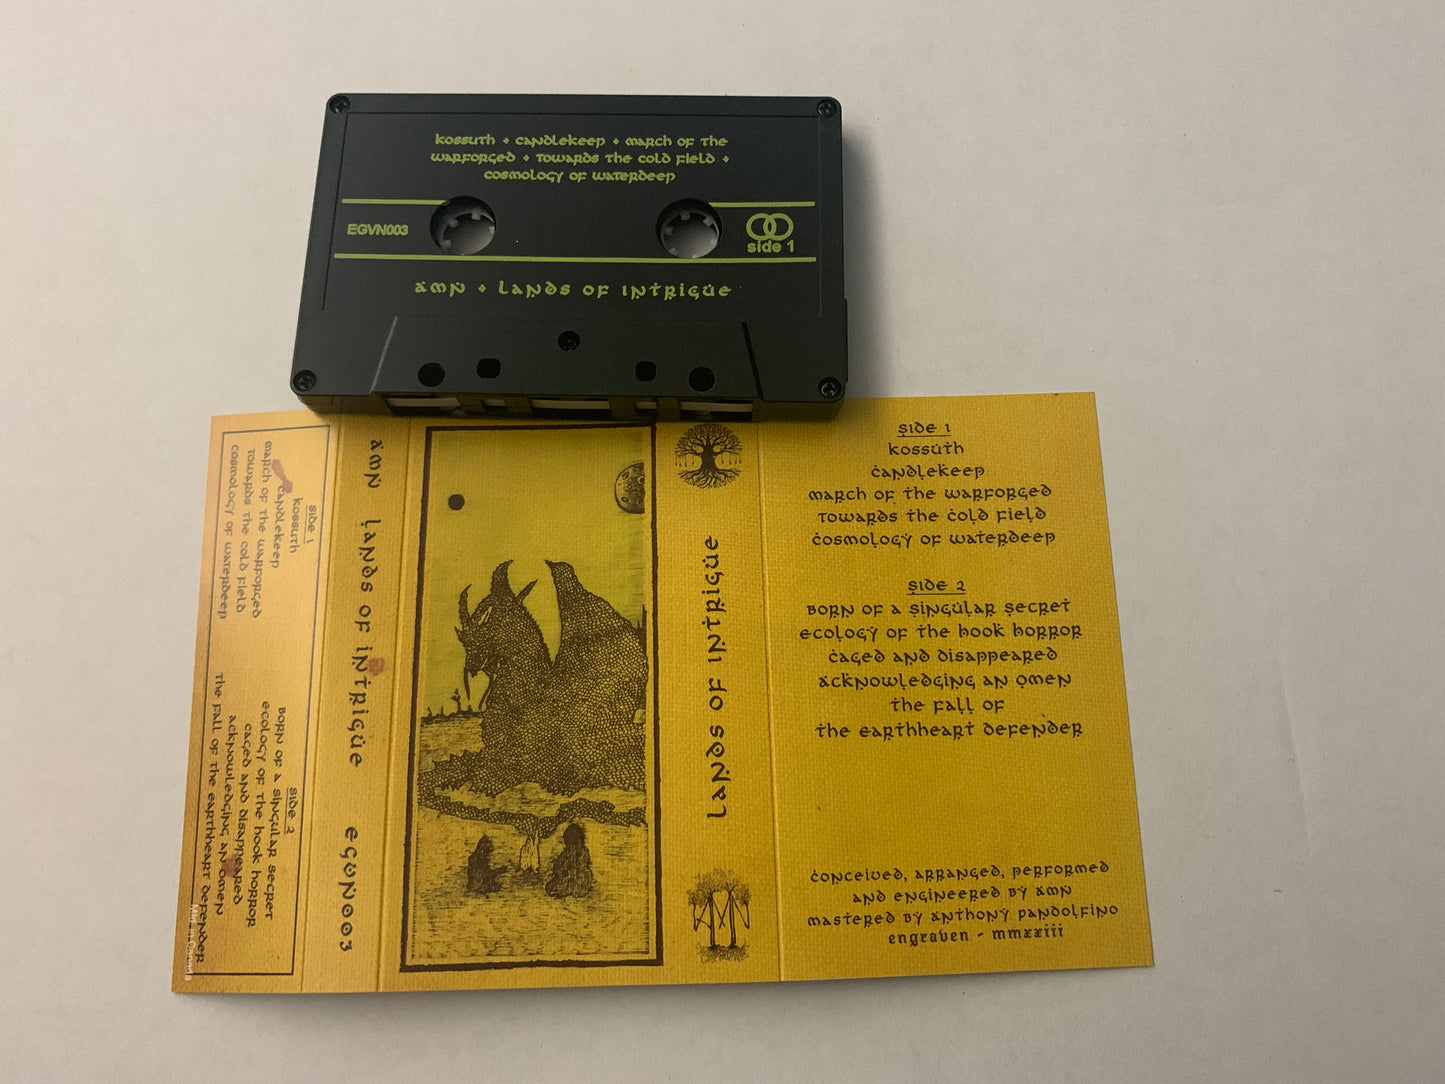 Amn - Lands of Intrigue [Dungeon Synth] (Engraven - Tape - 11/10/23)